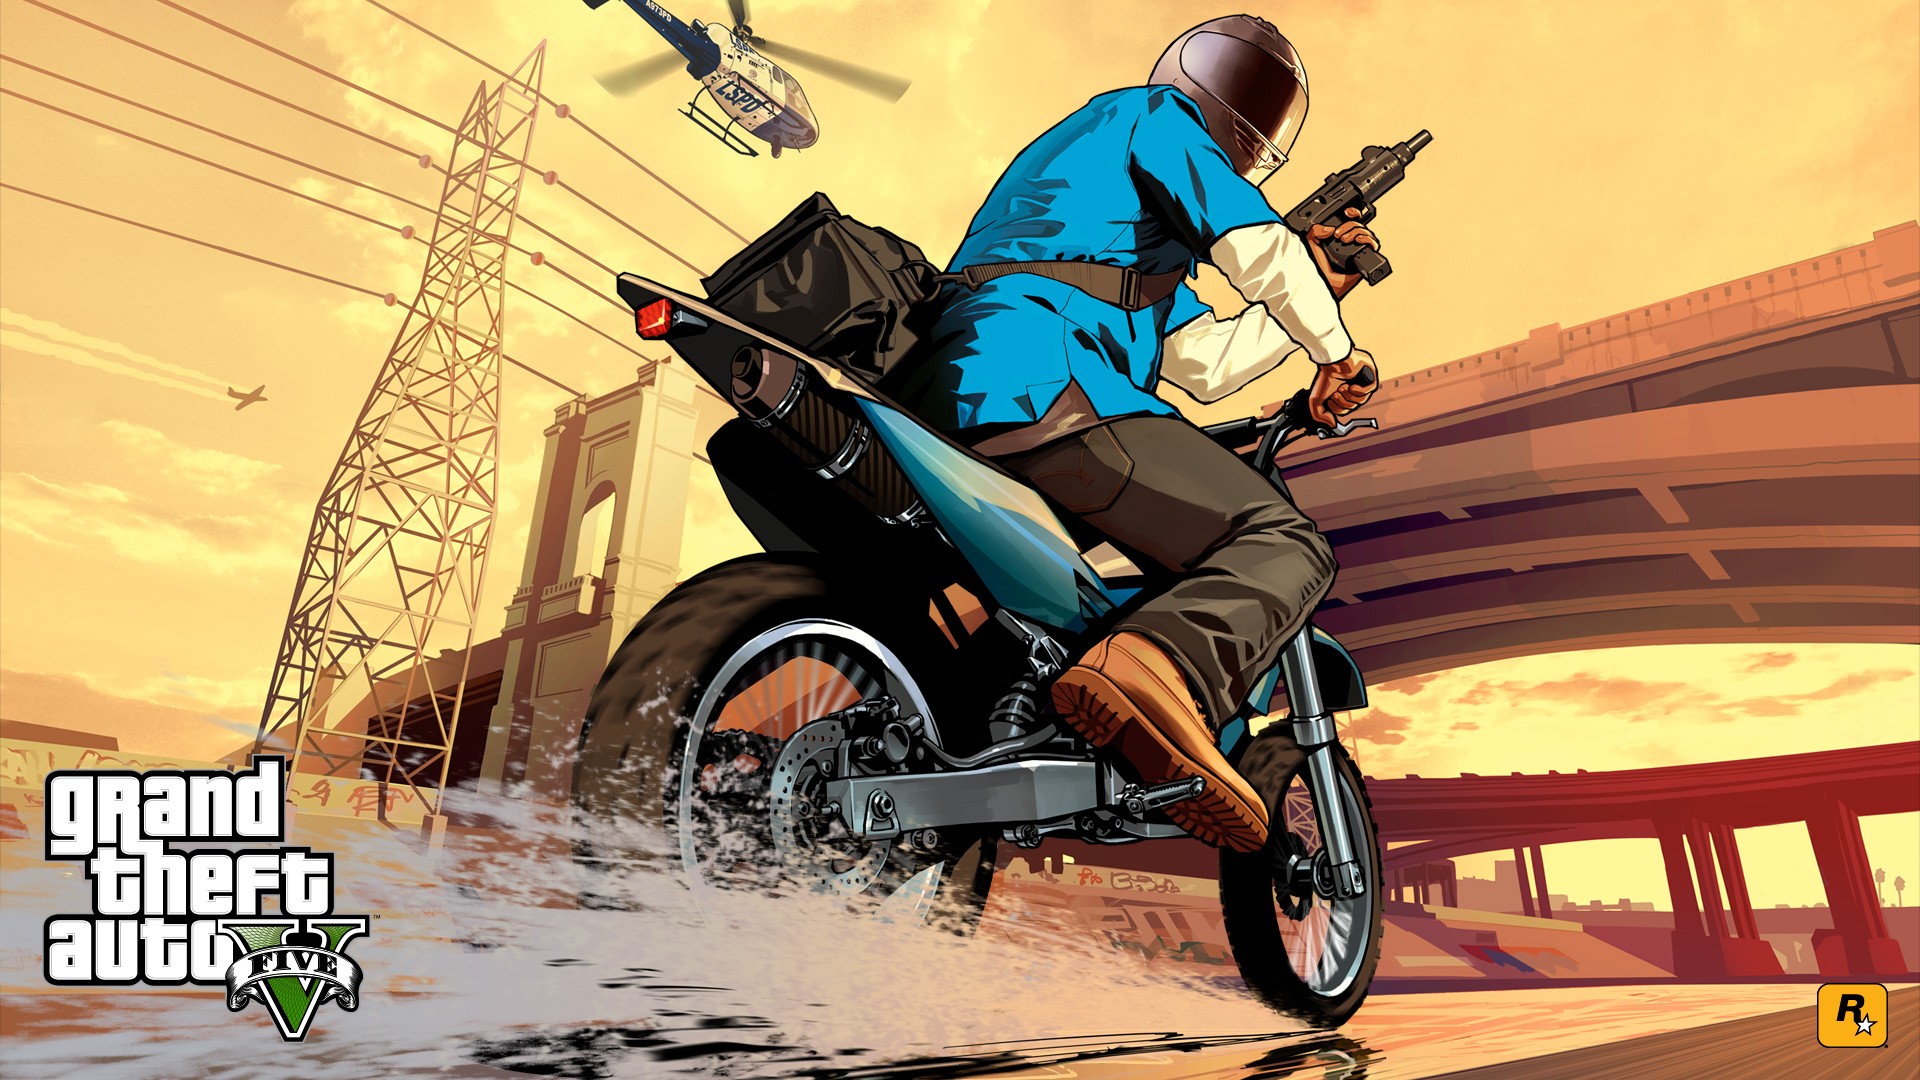 General 1920x1080 video games video game art motorcycle vehicle gangster PC gaming Grand Theft Auto V machine gun crime police helicopters